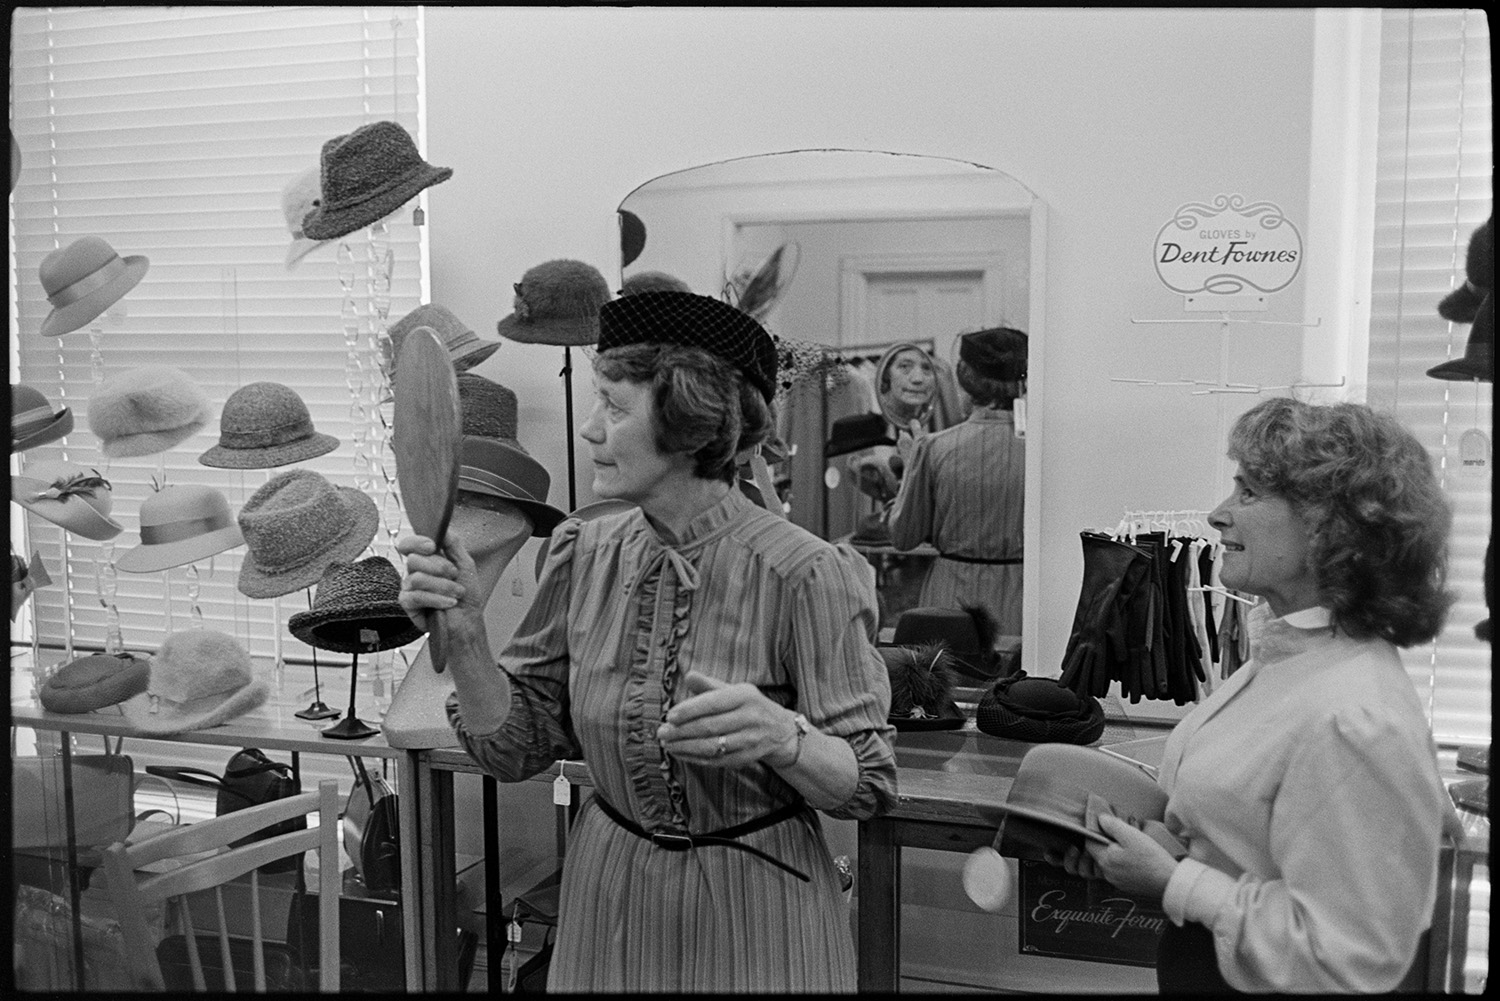 Shop assistant helping woman choose a hat in hat department of clothes shop. Hat display. 
[A shop assistant in Trapnells clothes shop in Bideford High Street, helping a woman choose a hat. The customer is holding a mirror and looking at the hat she is trying on. A hat display can be seen in the background.]